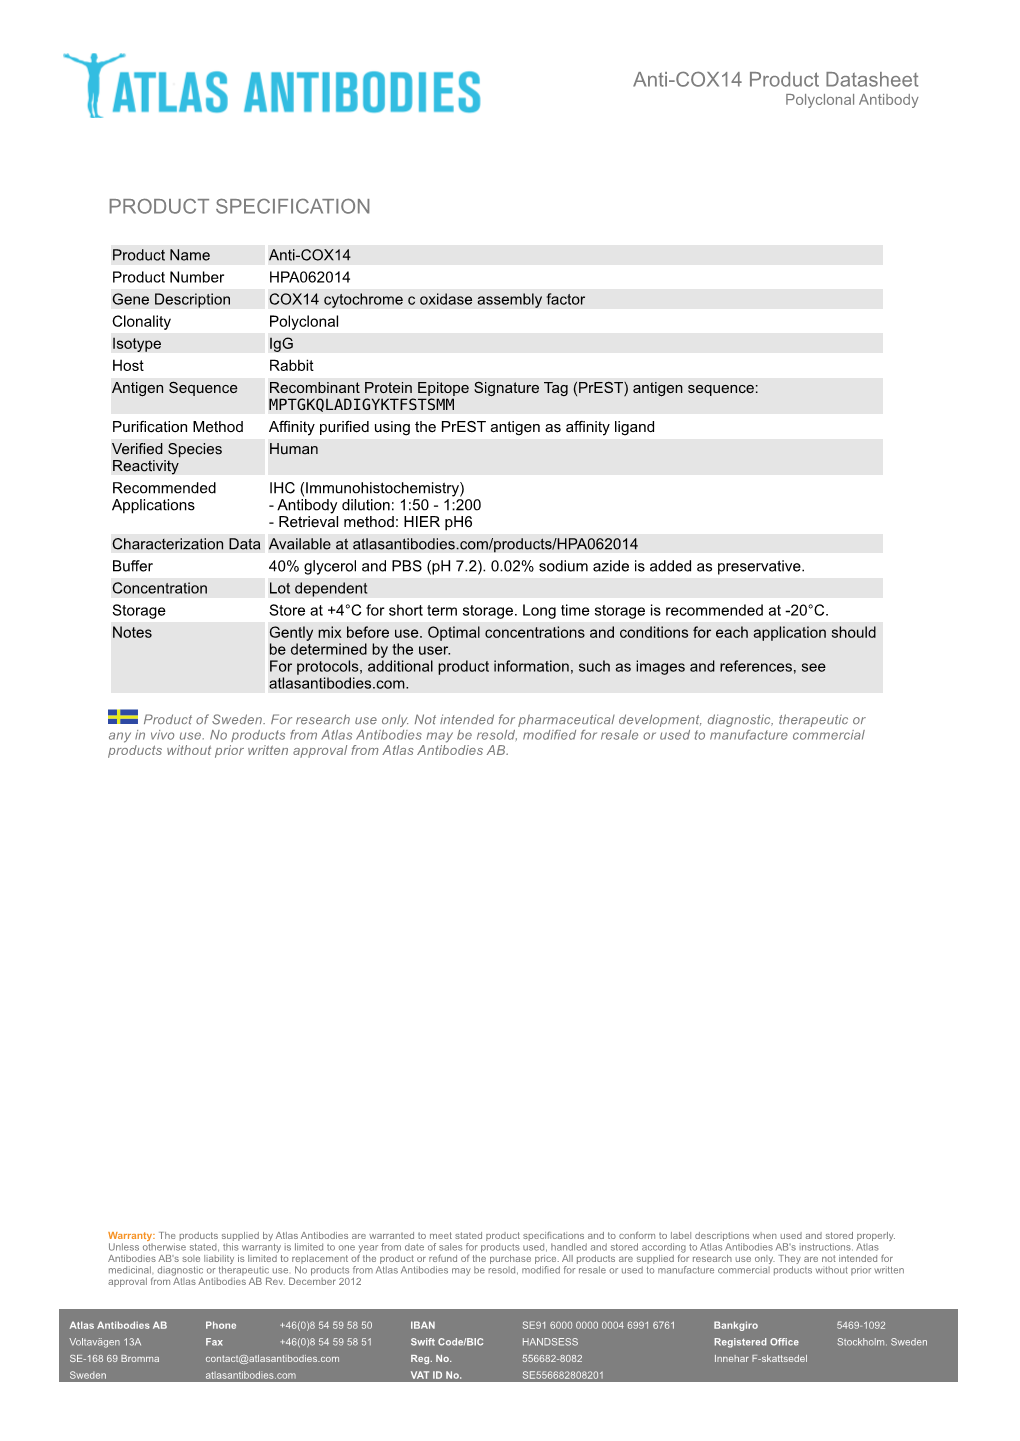 PRODUCT SPECIFICATION Anti-COX14 Product Datasheet